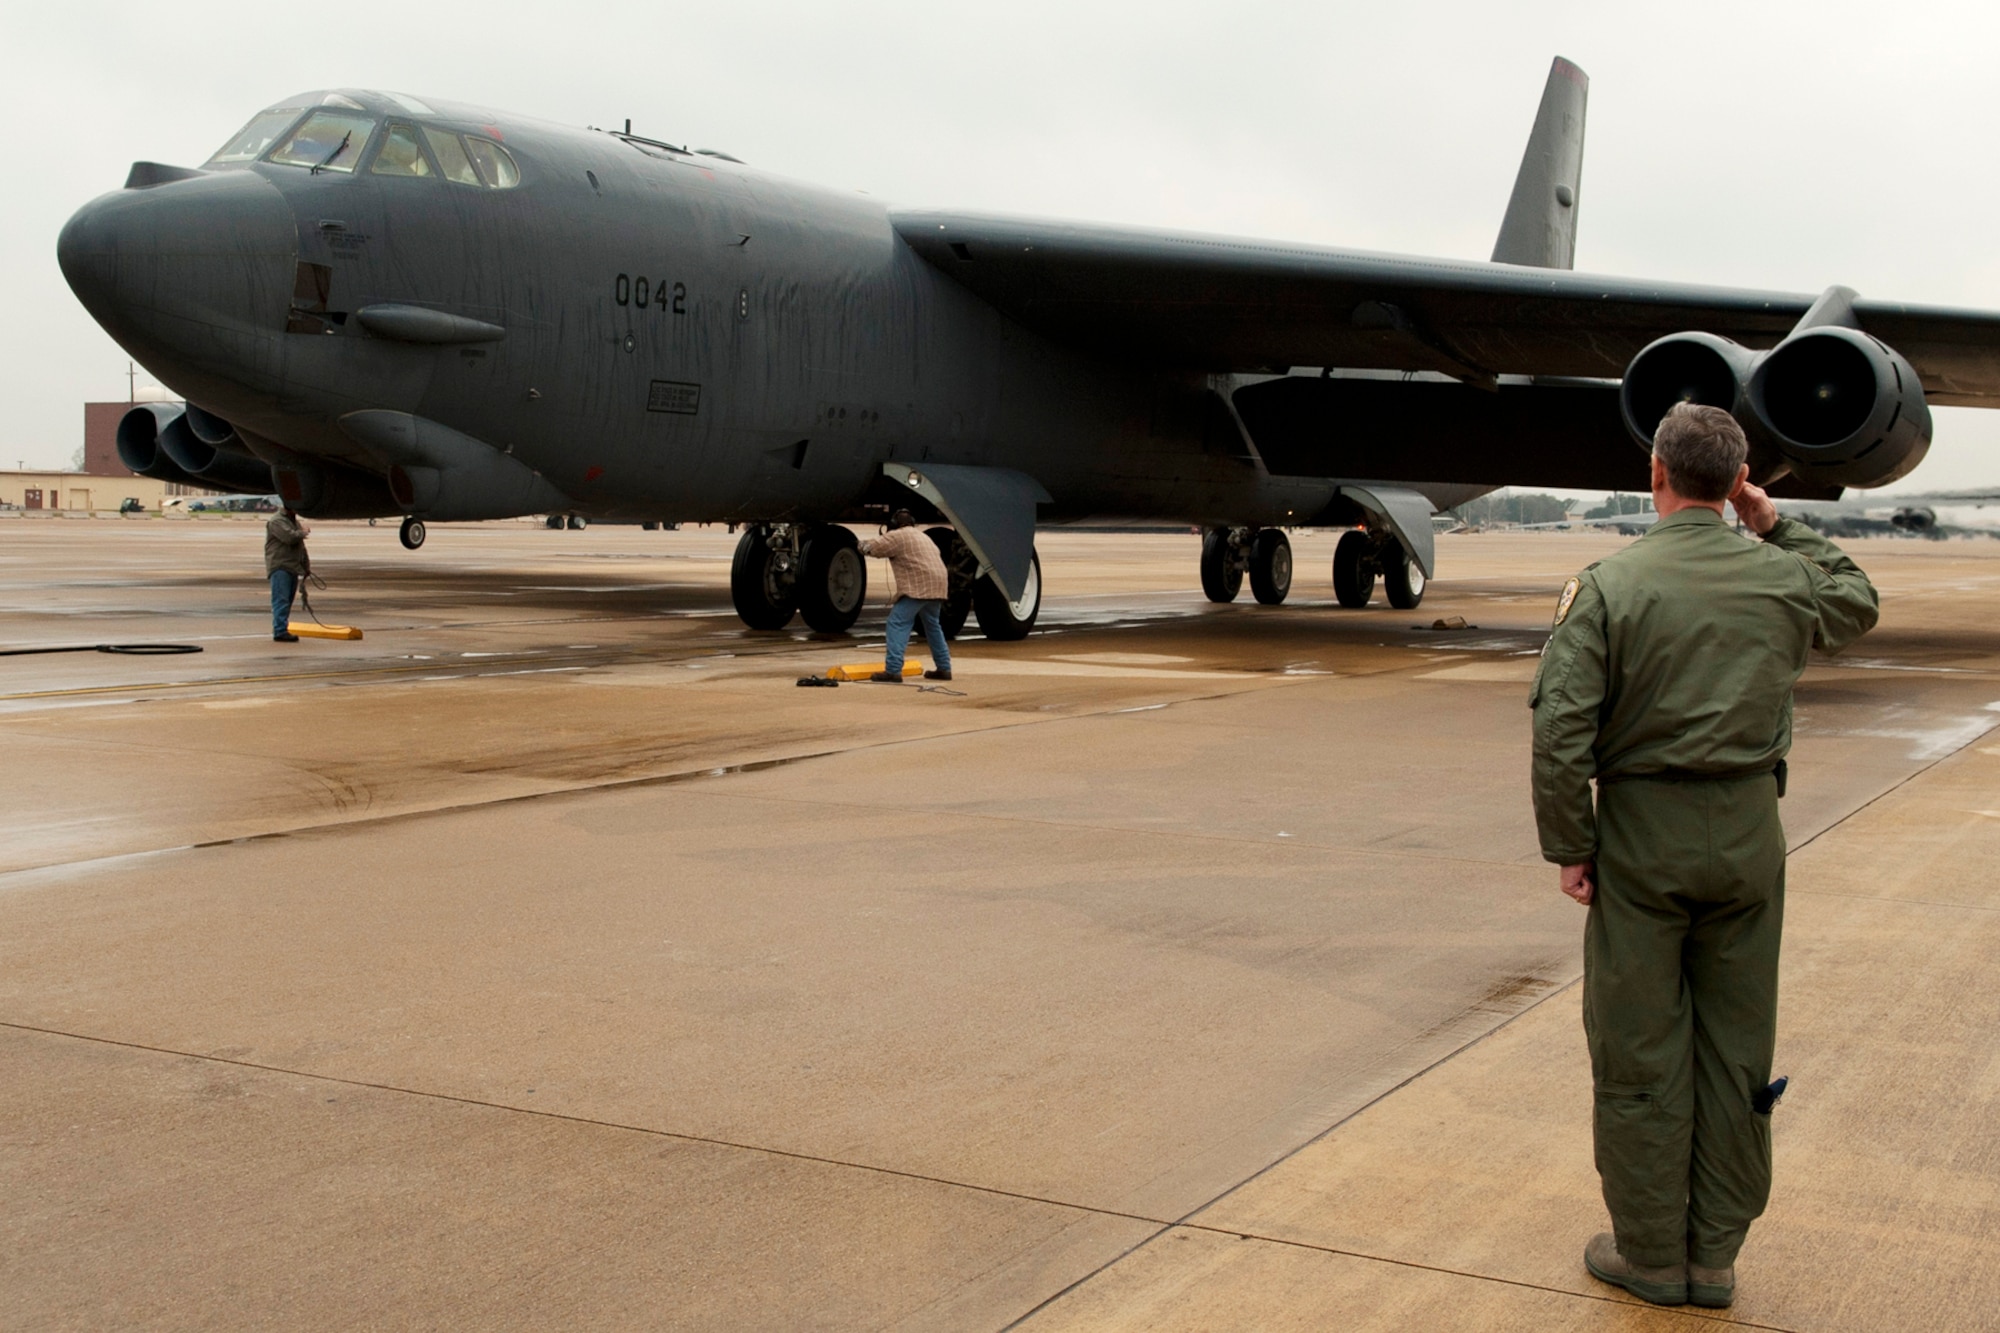 U.S. Air Force Col. Joseph Jones, 307th Bomb Wing vice commander, holds a salute as a 93rd Bomb Squadron B-52H Stratofortress carrying Brig. Gen. John Mooney III, 307th Bomb Wing commander, taxis to its parking spot after returning from a sortie, Barksdale Air Force Base, La., Feb. 10, 2012. This sortie marked the last flight for Mooney before relinquishing command of the 307th BW. (U.S. Air Force photo by Master Sgt. Greg Steele/Released)